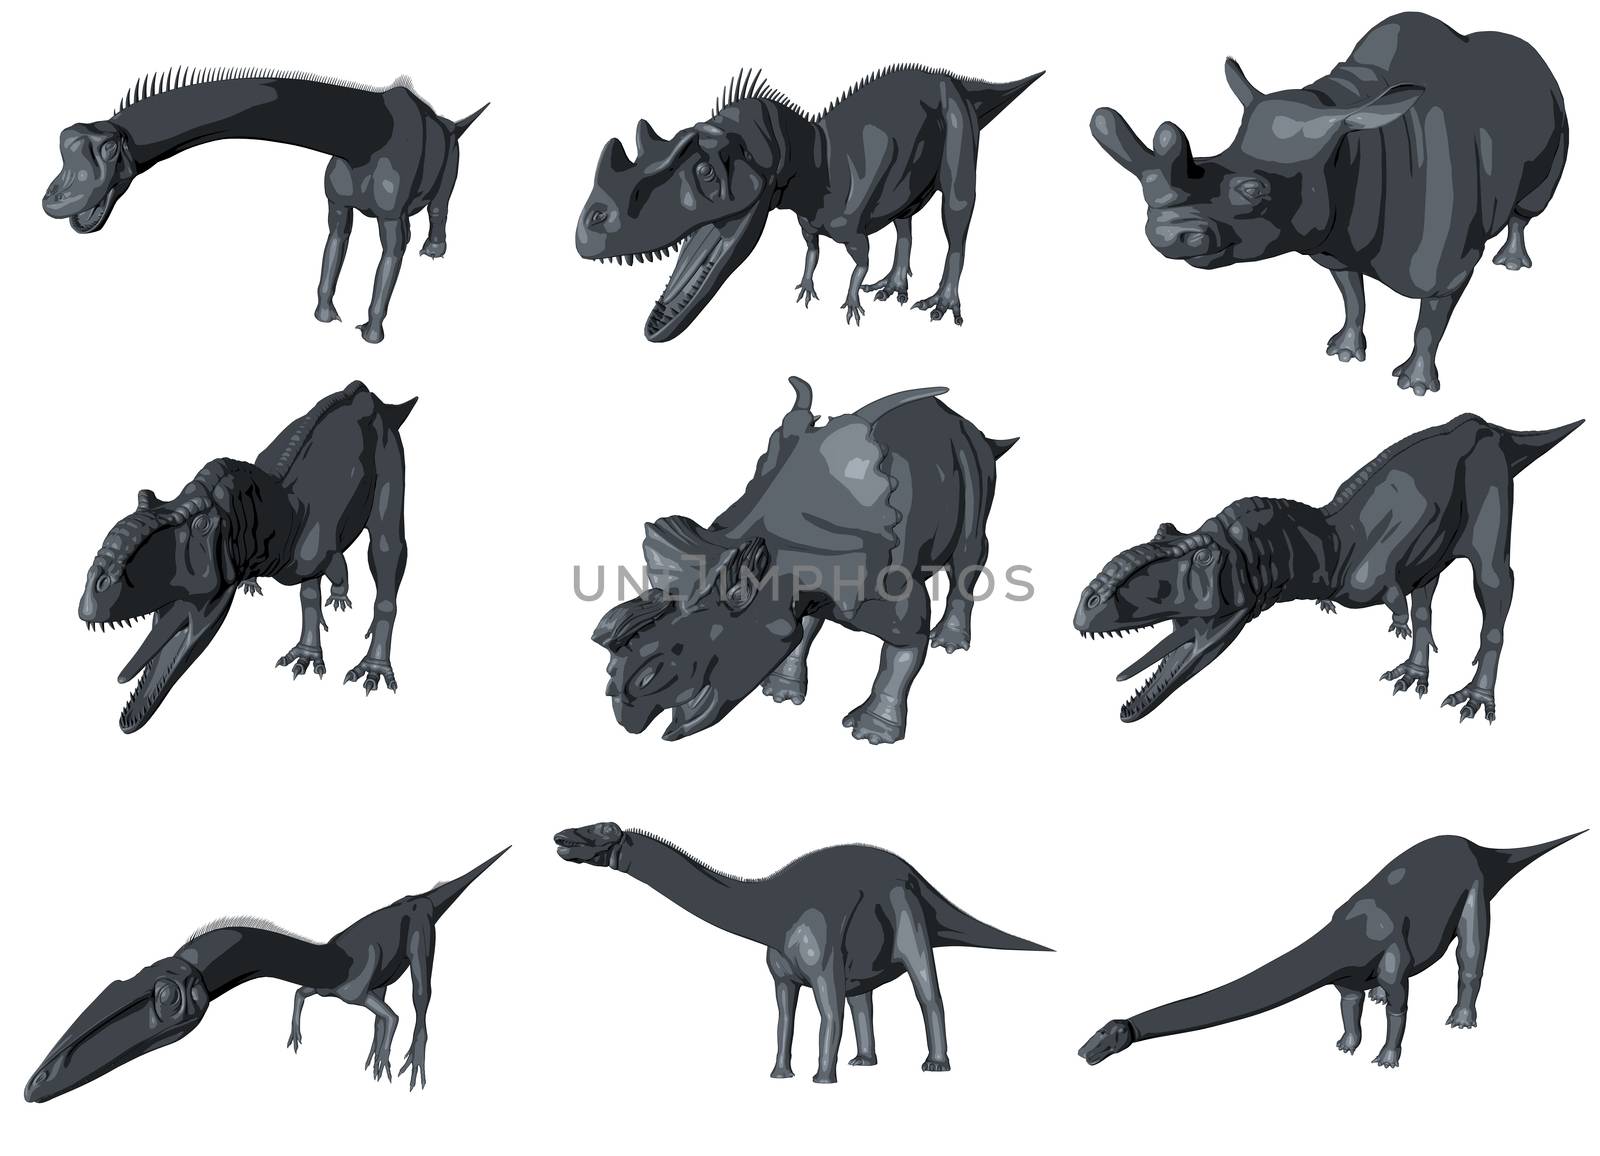 3d sketch render of a  dinosaur collection by fares139